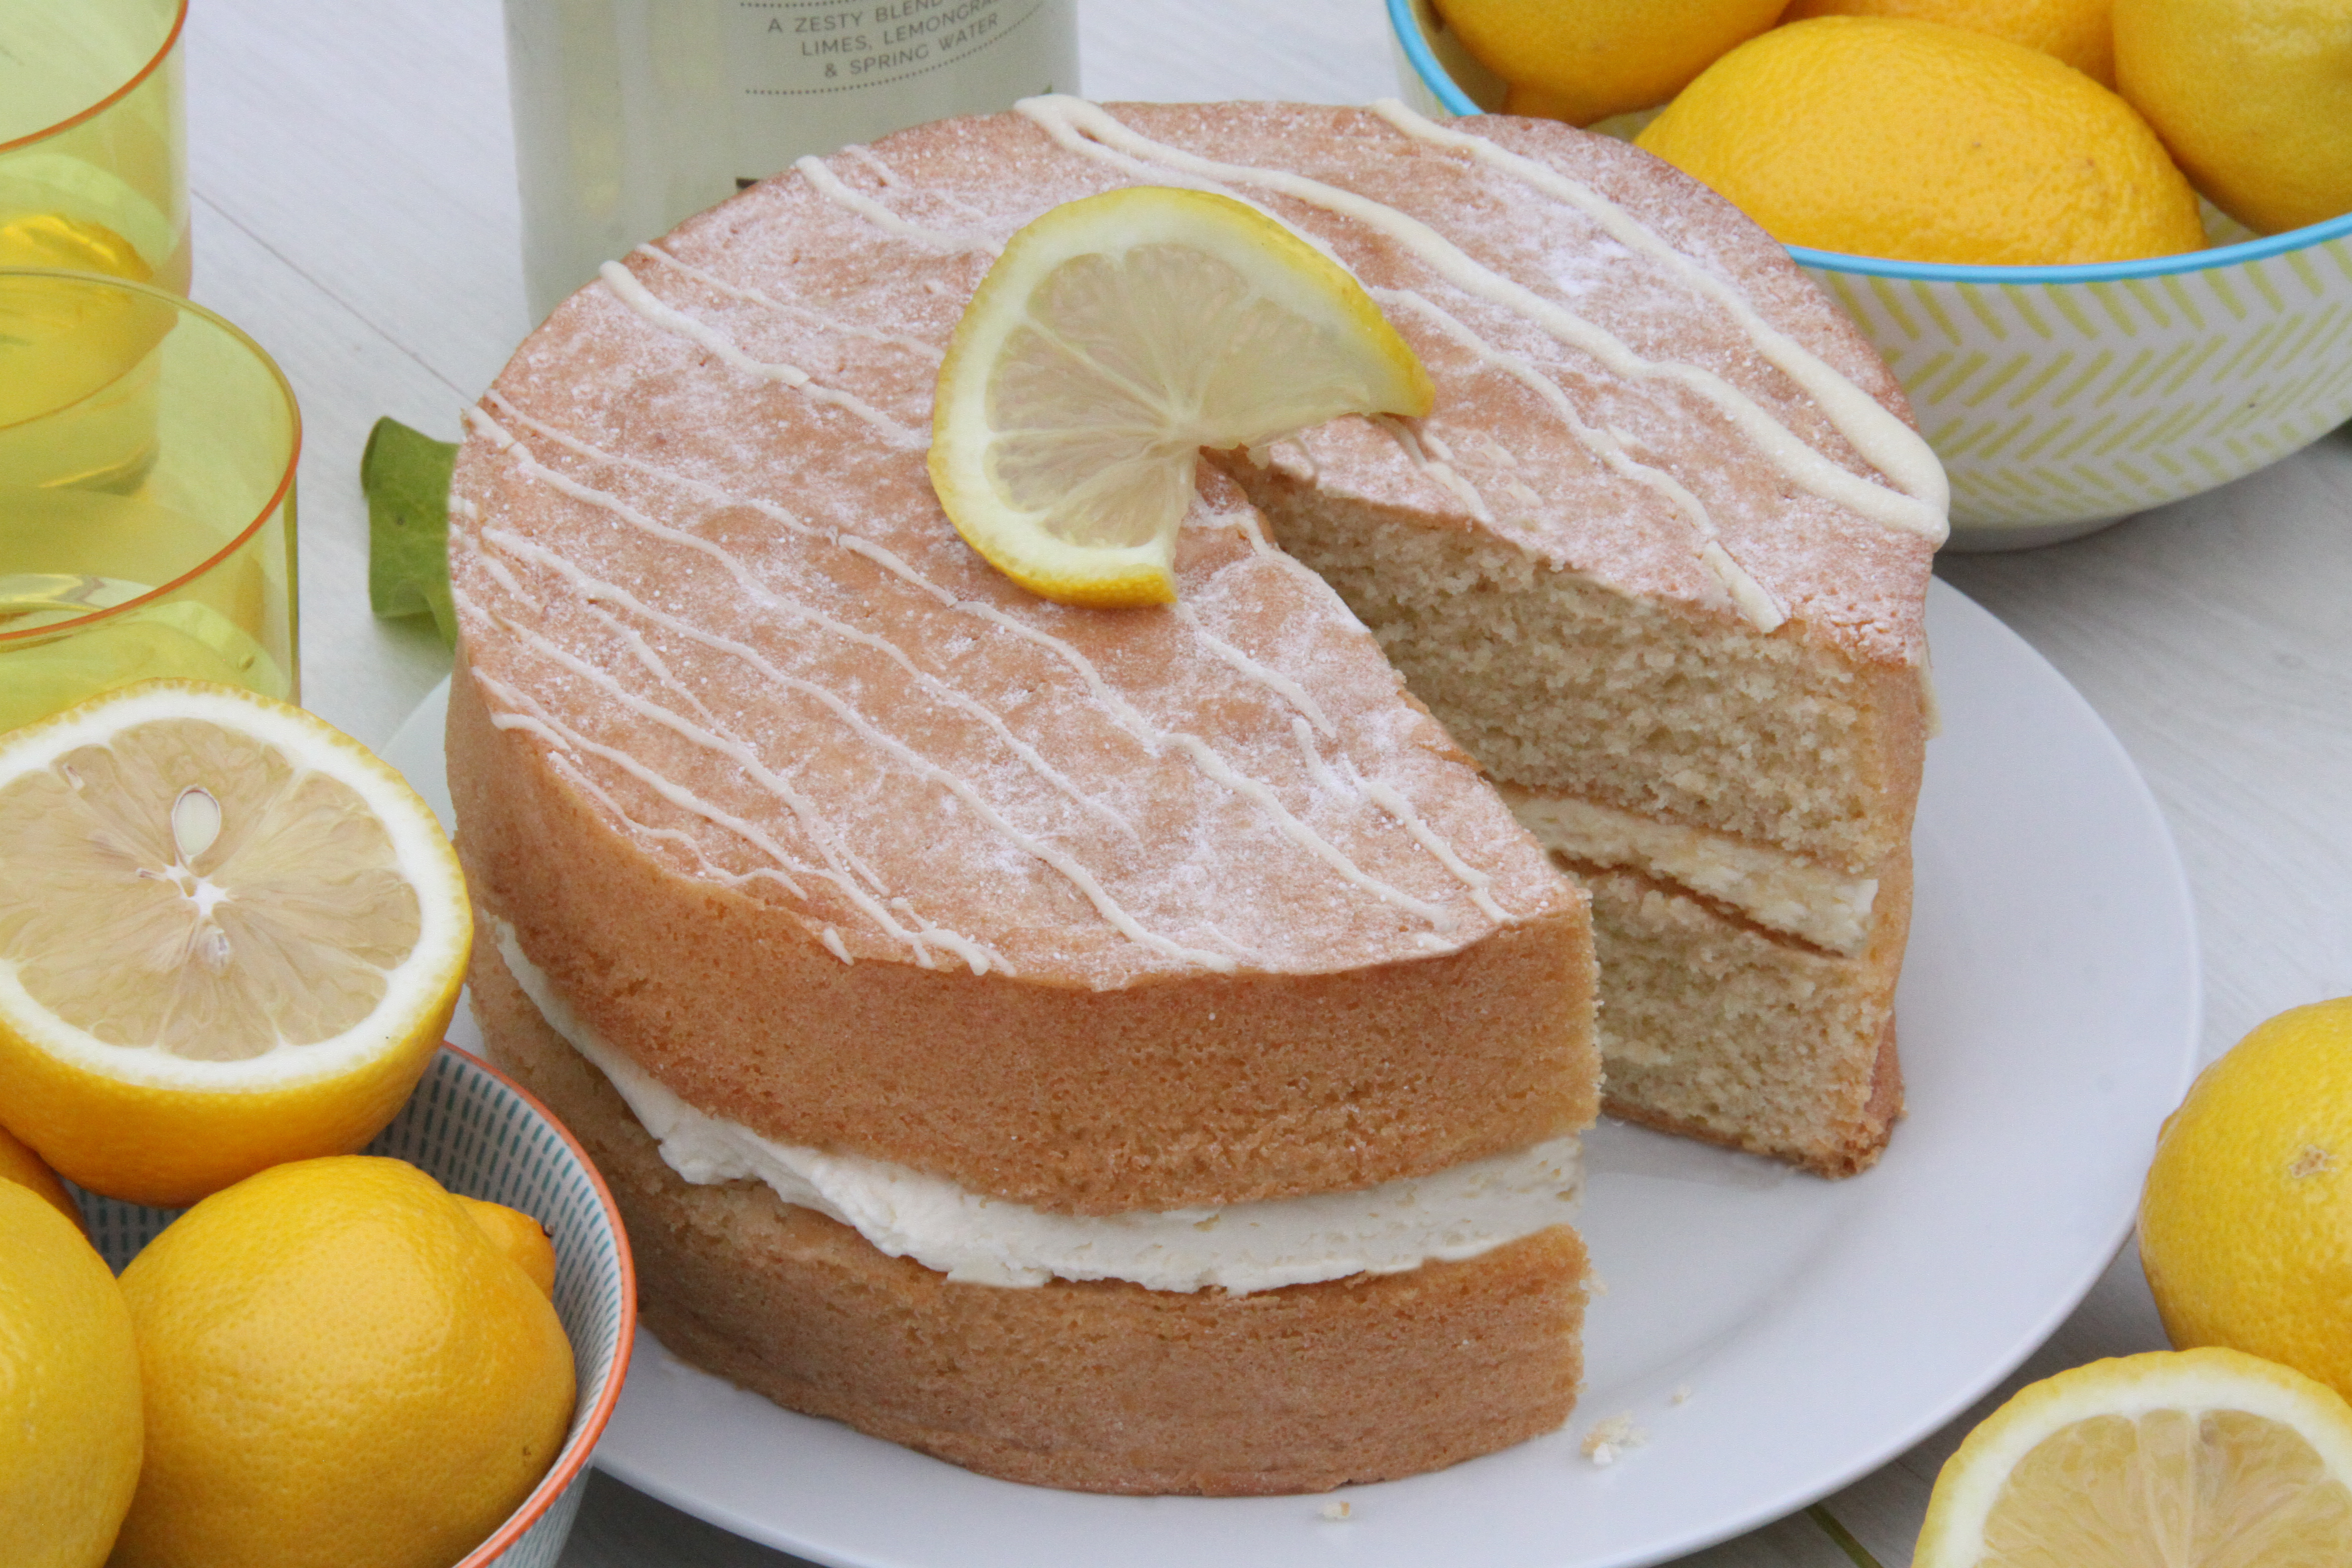 Celebrate the weekend with a SPONGE Friday! Order by Thursday 2pm for delivery on Friday!